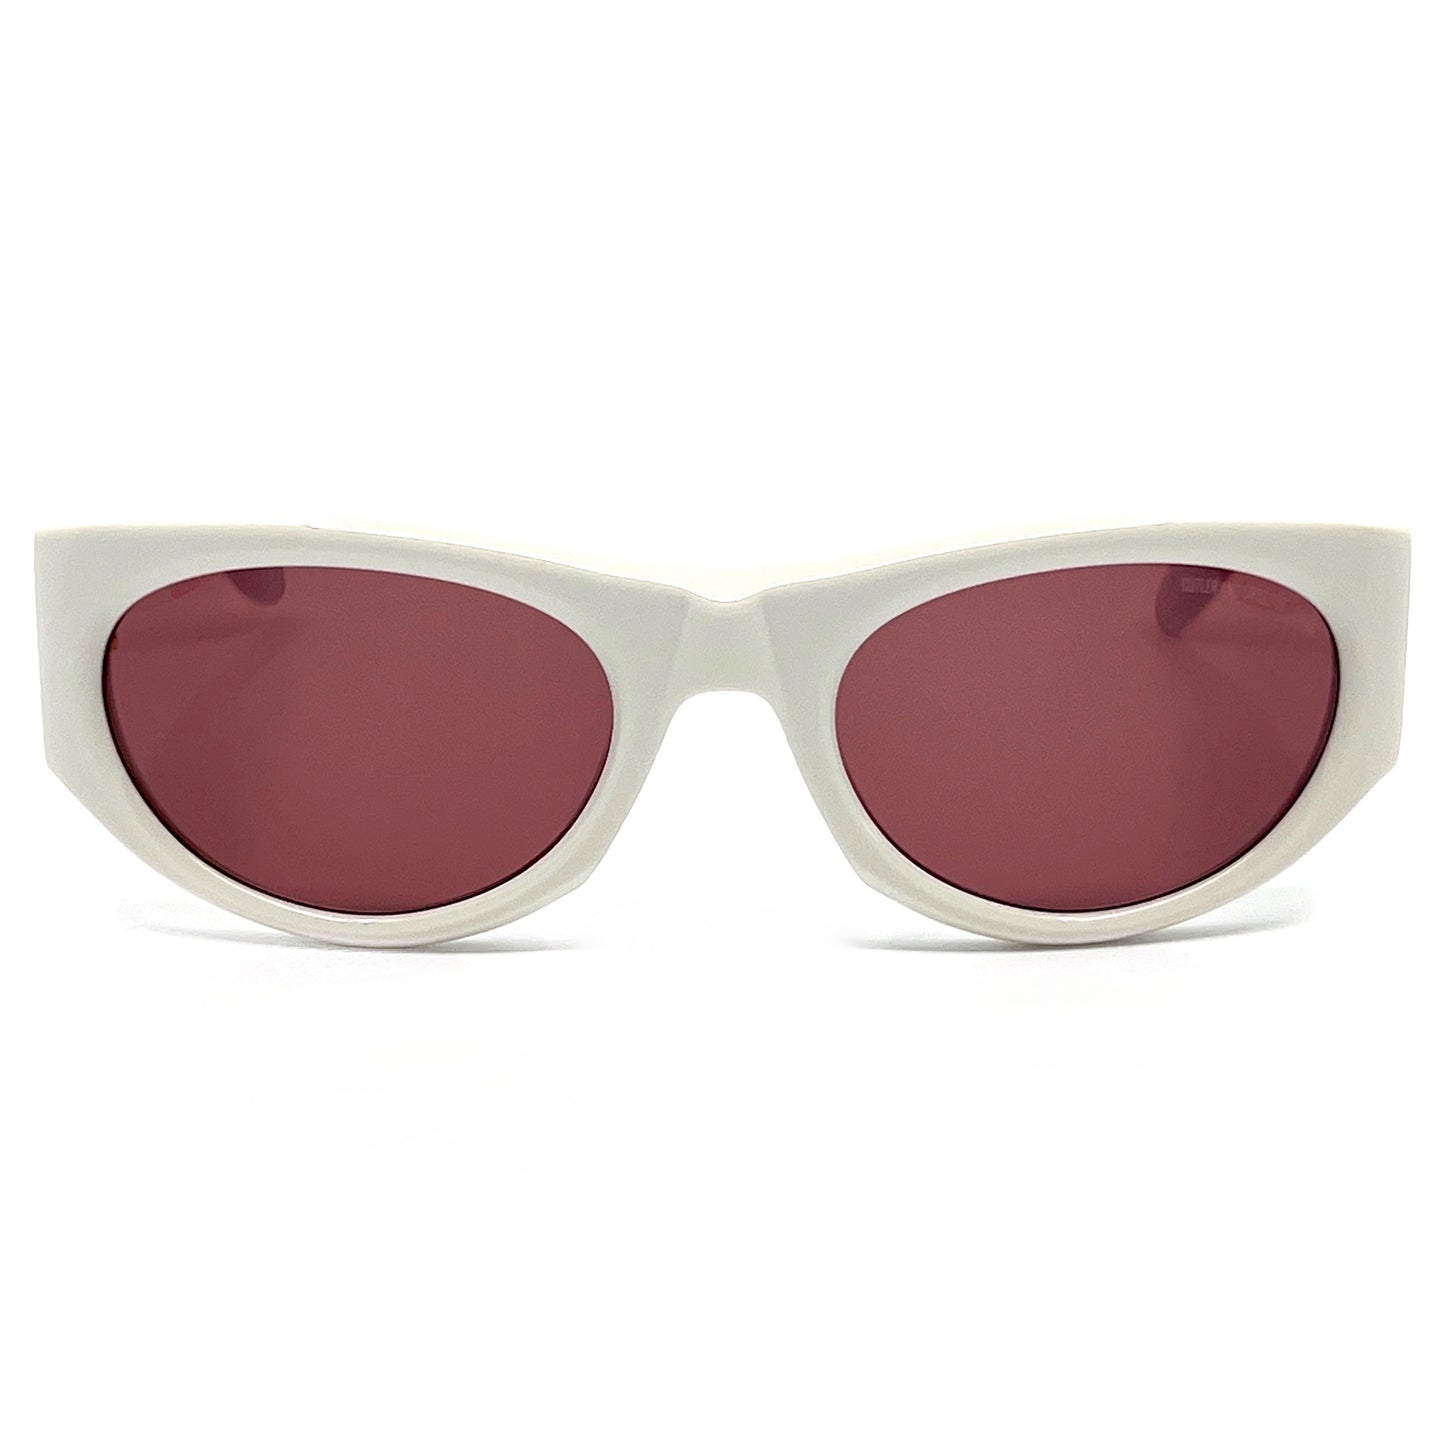 CUTLER AND GROSS Sunglasses CGLE 9276 01